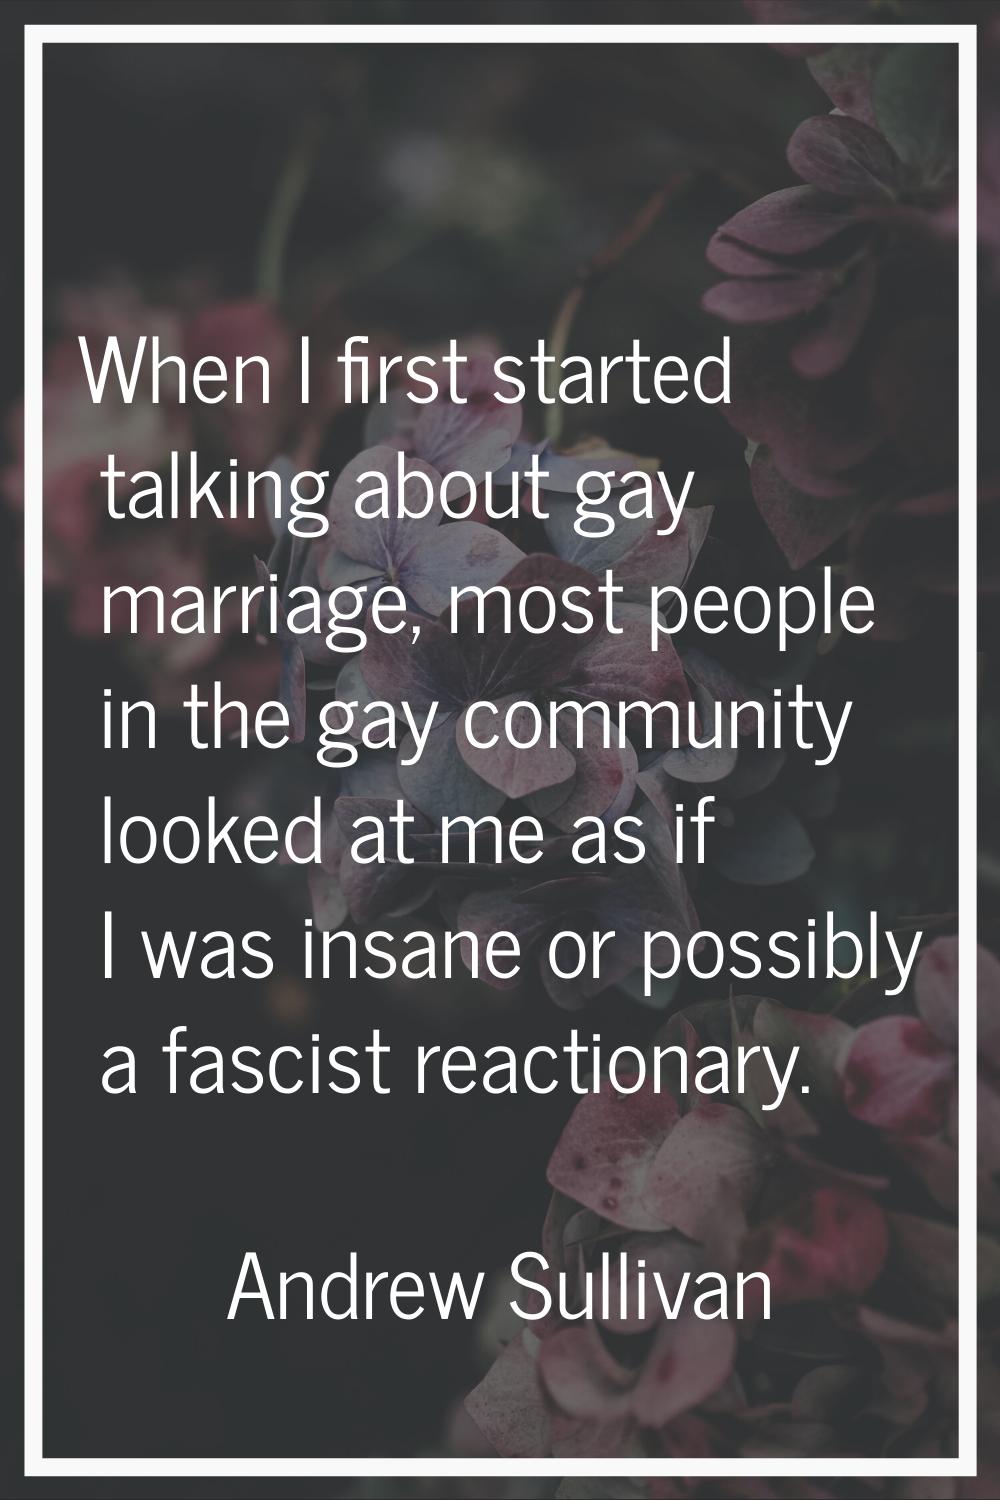 When I first started talking about gay marriage, most people in the gay community looked at me as i